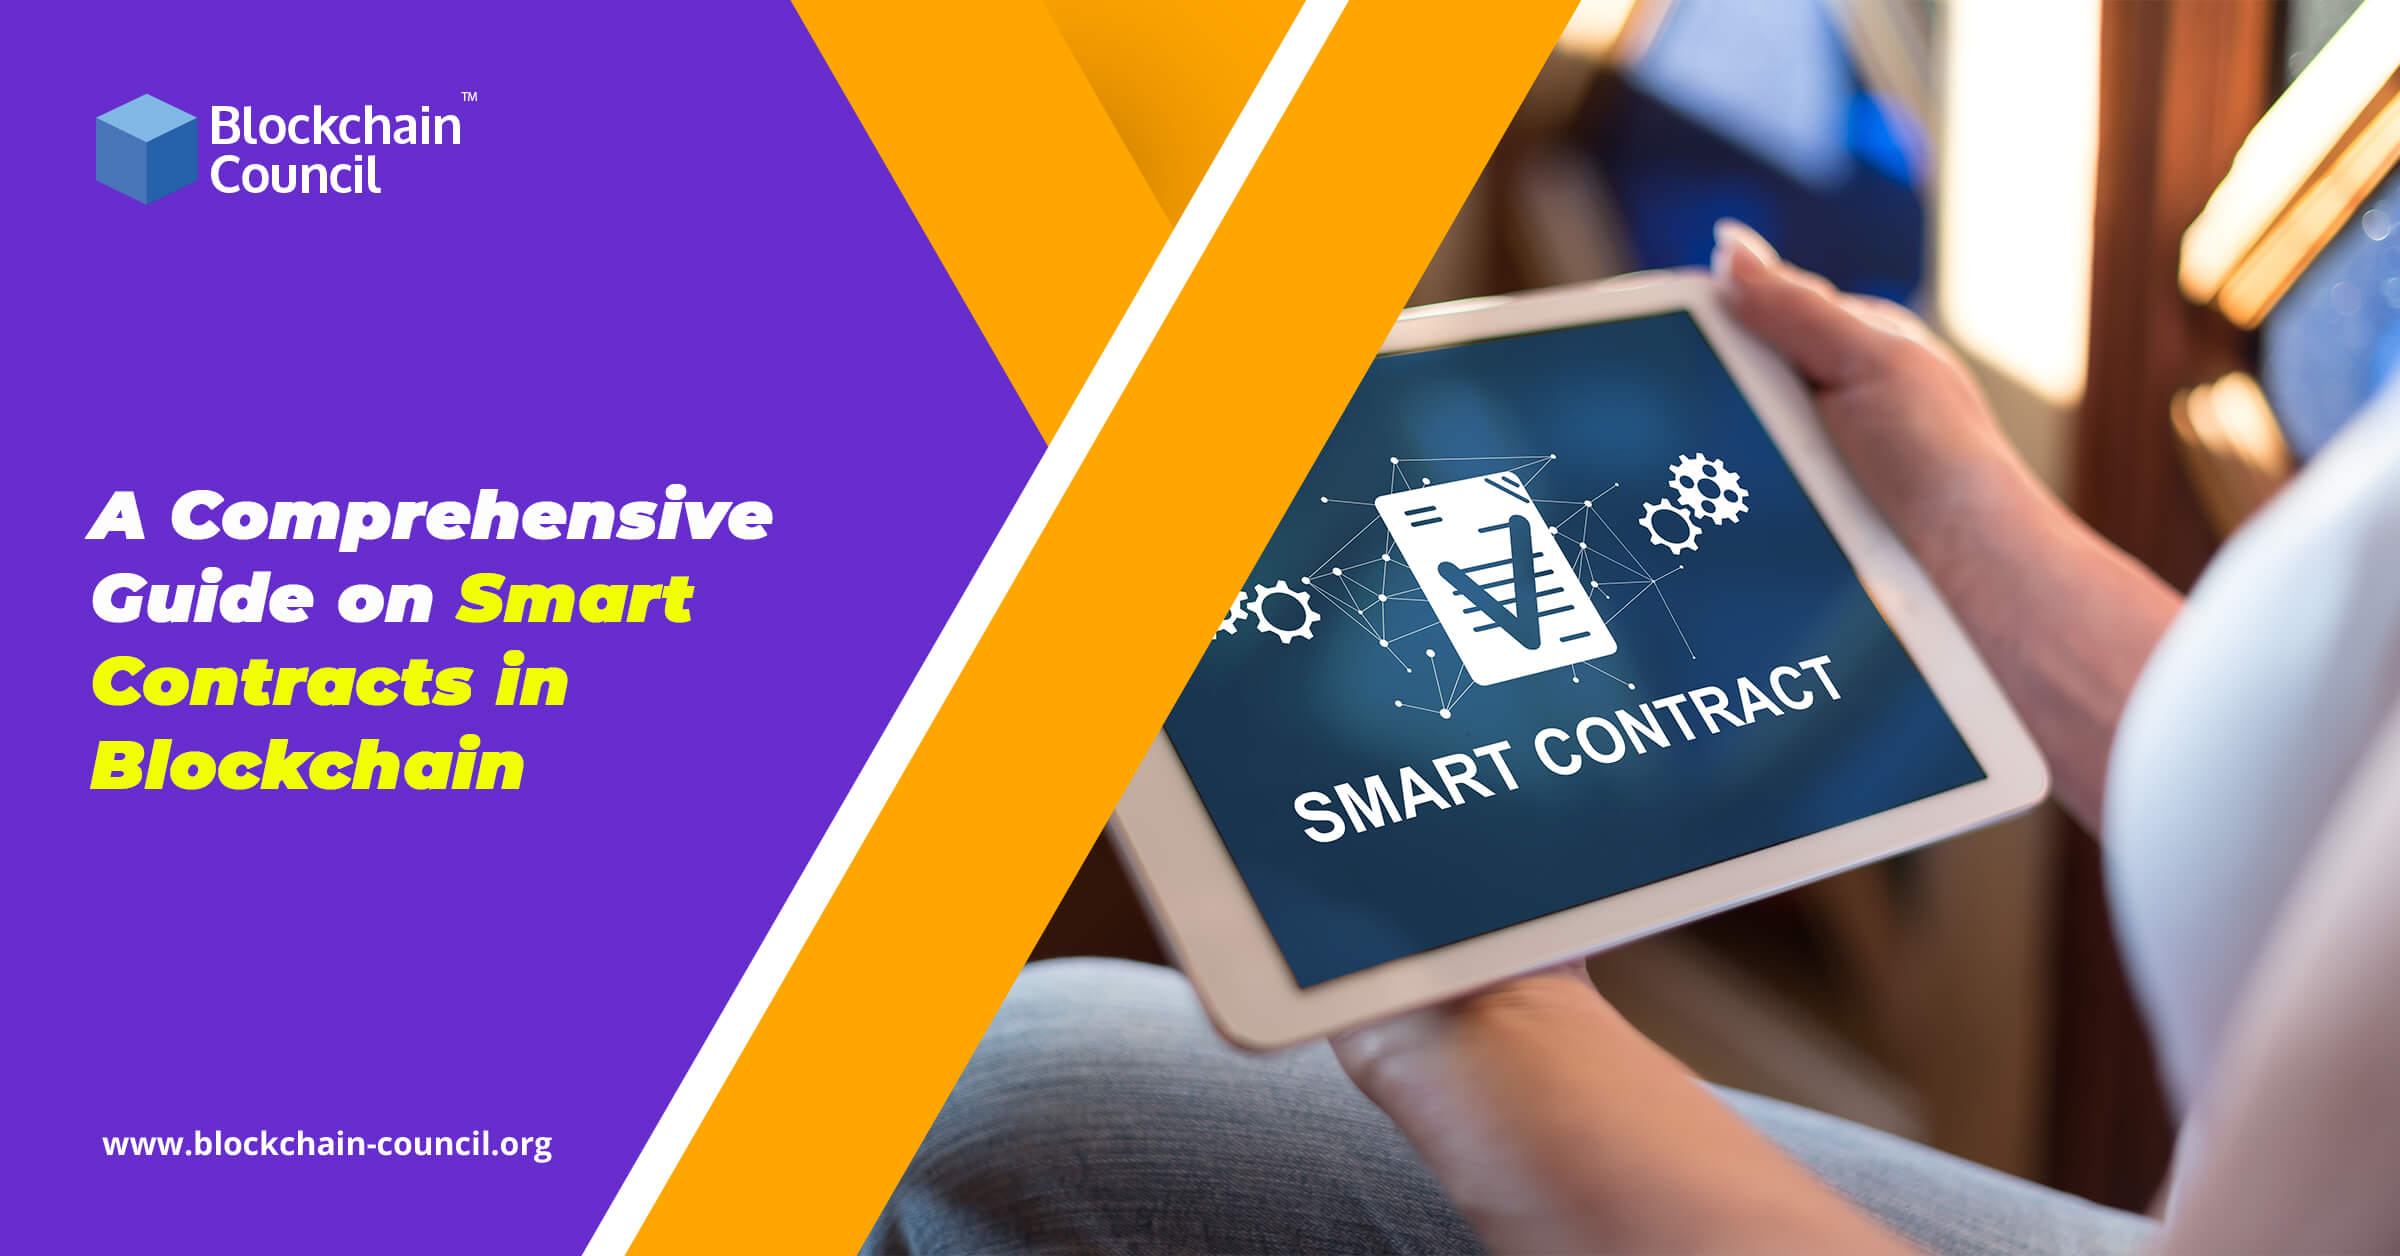 A Comprehensive Guide on Smart Contracts in Blockchain